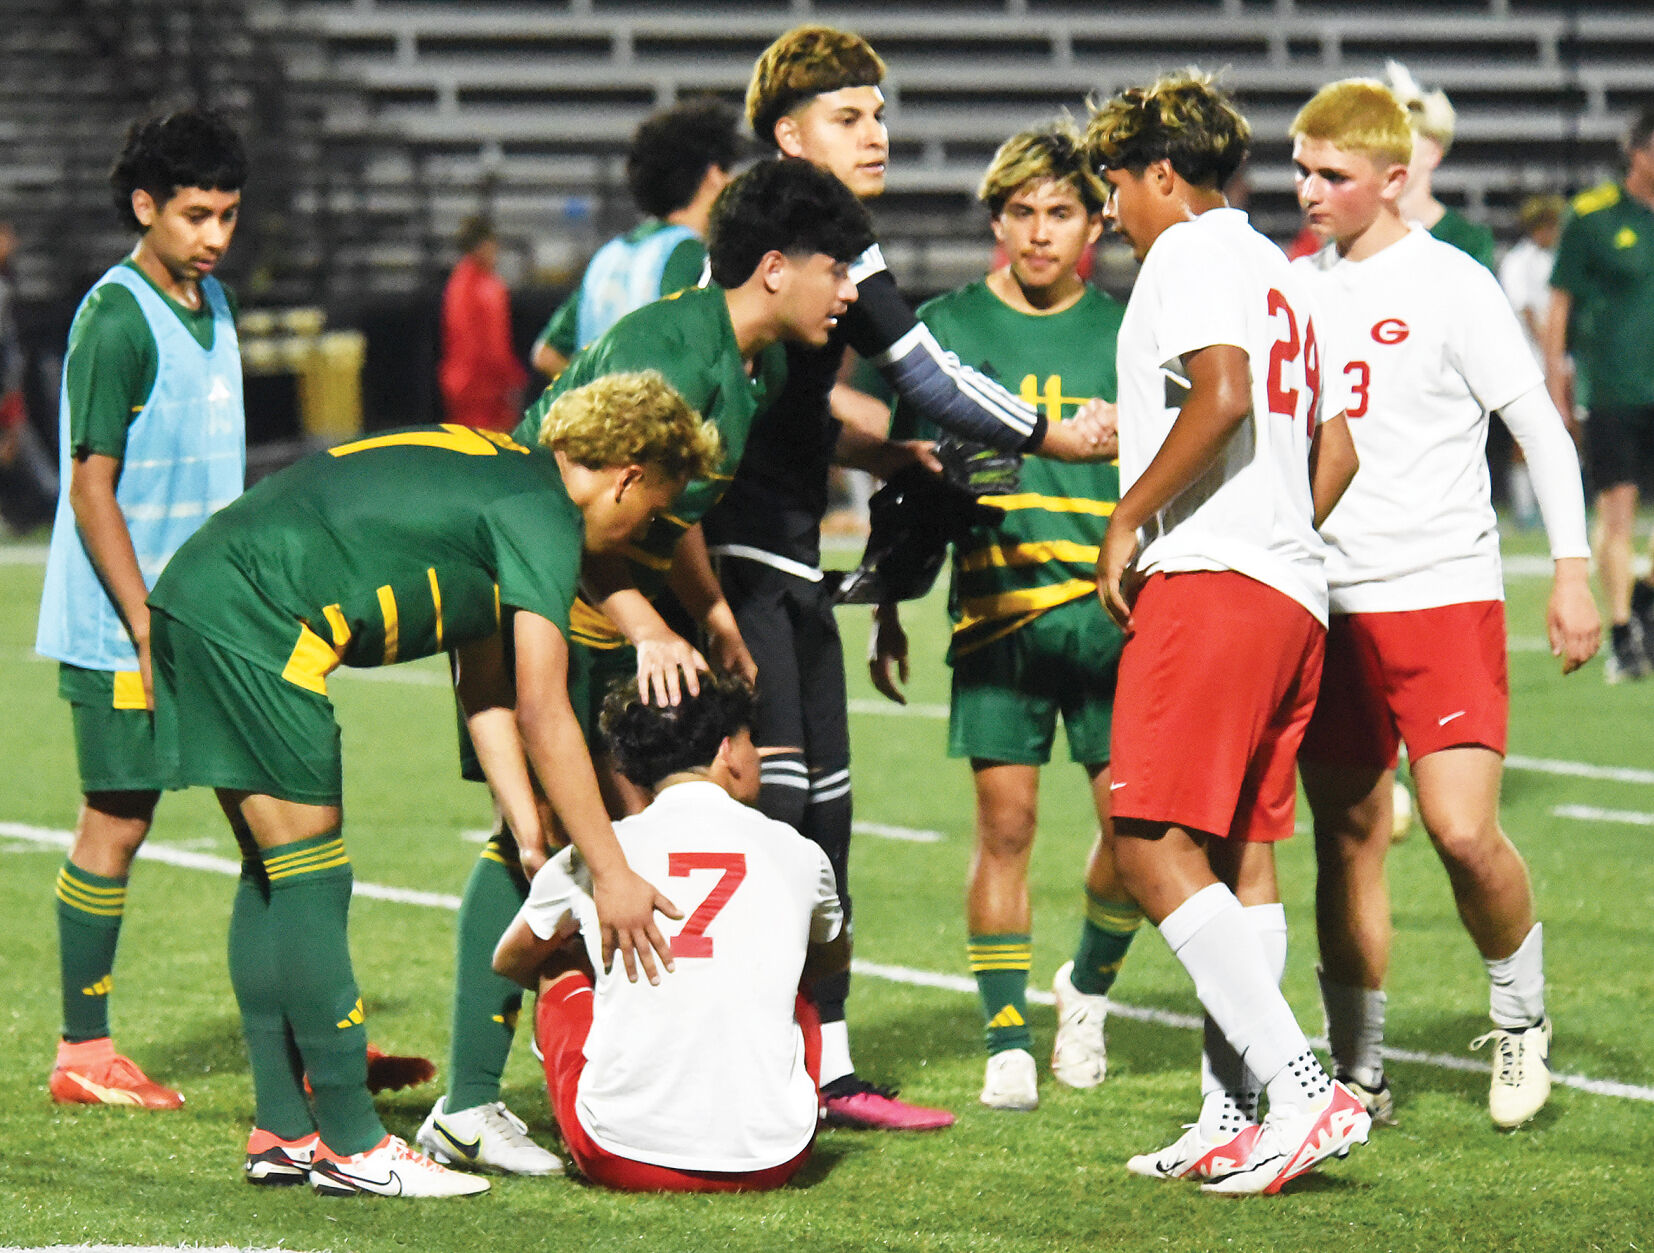 Longview vs Greenville Lions Soccer Playoff: Salazar’s Hat-trick Leads to 3-0 Victory